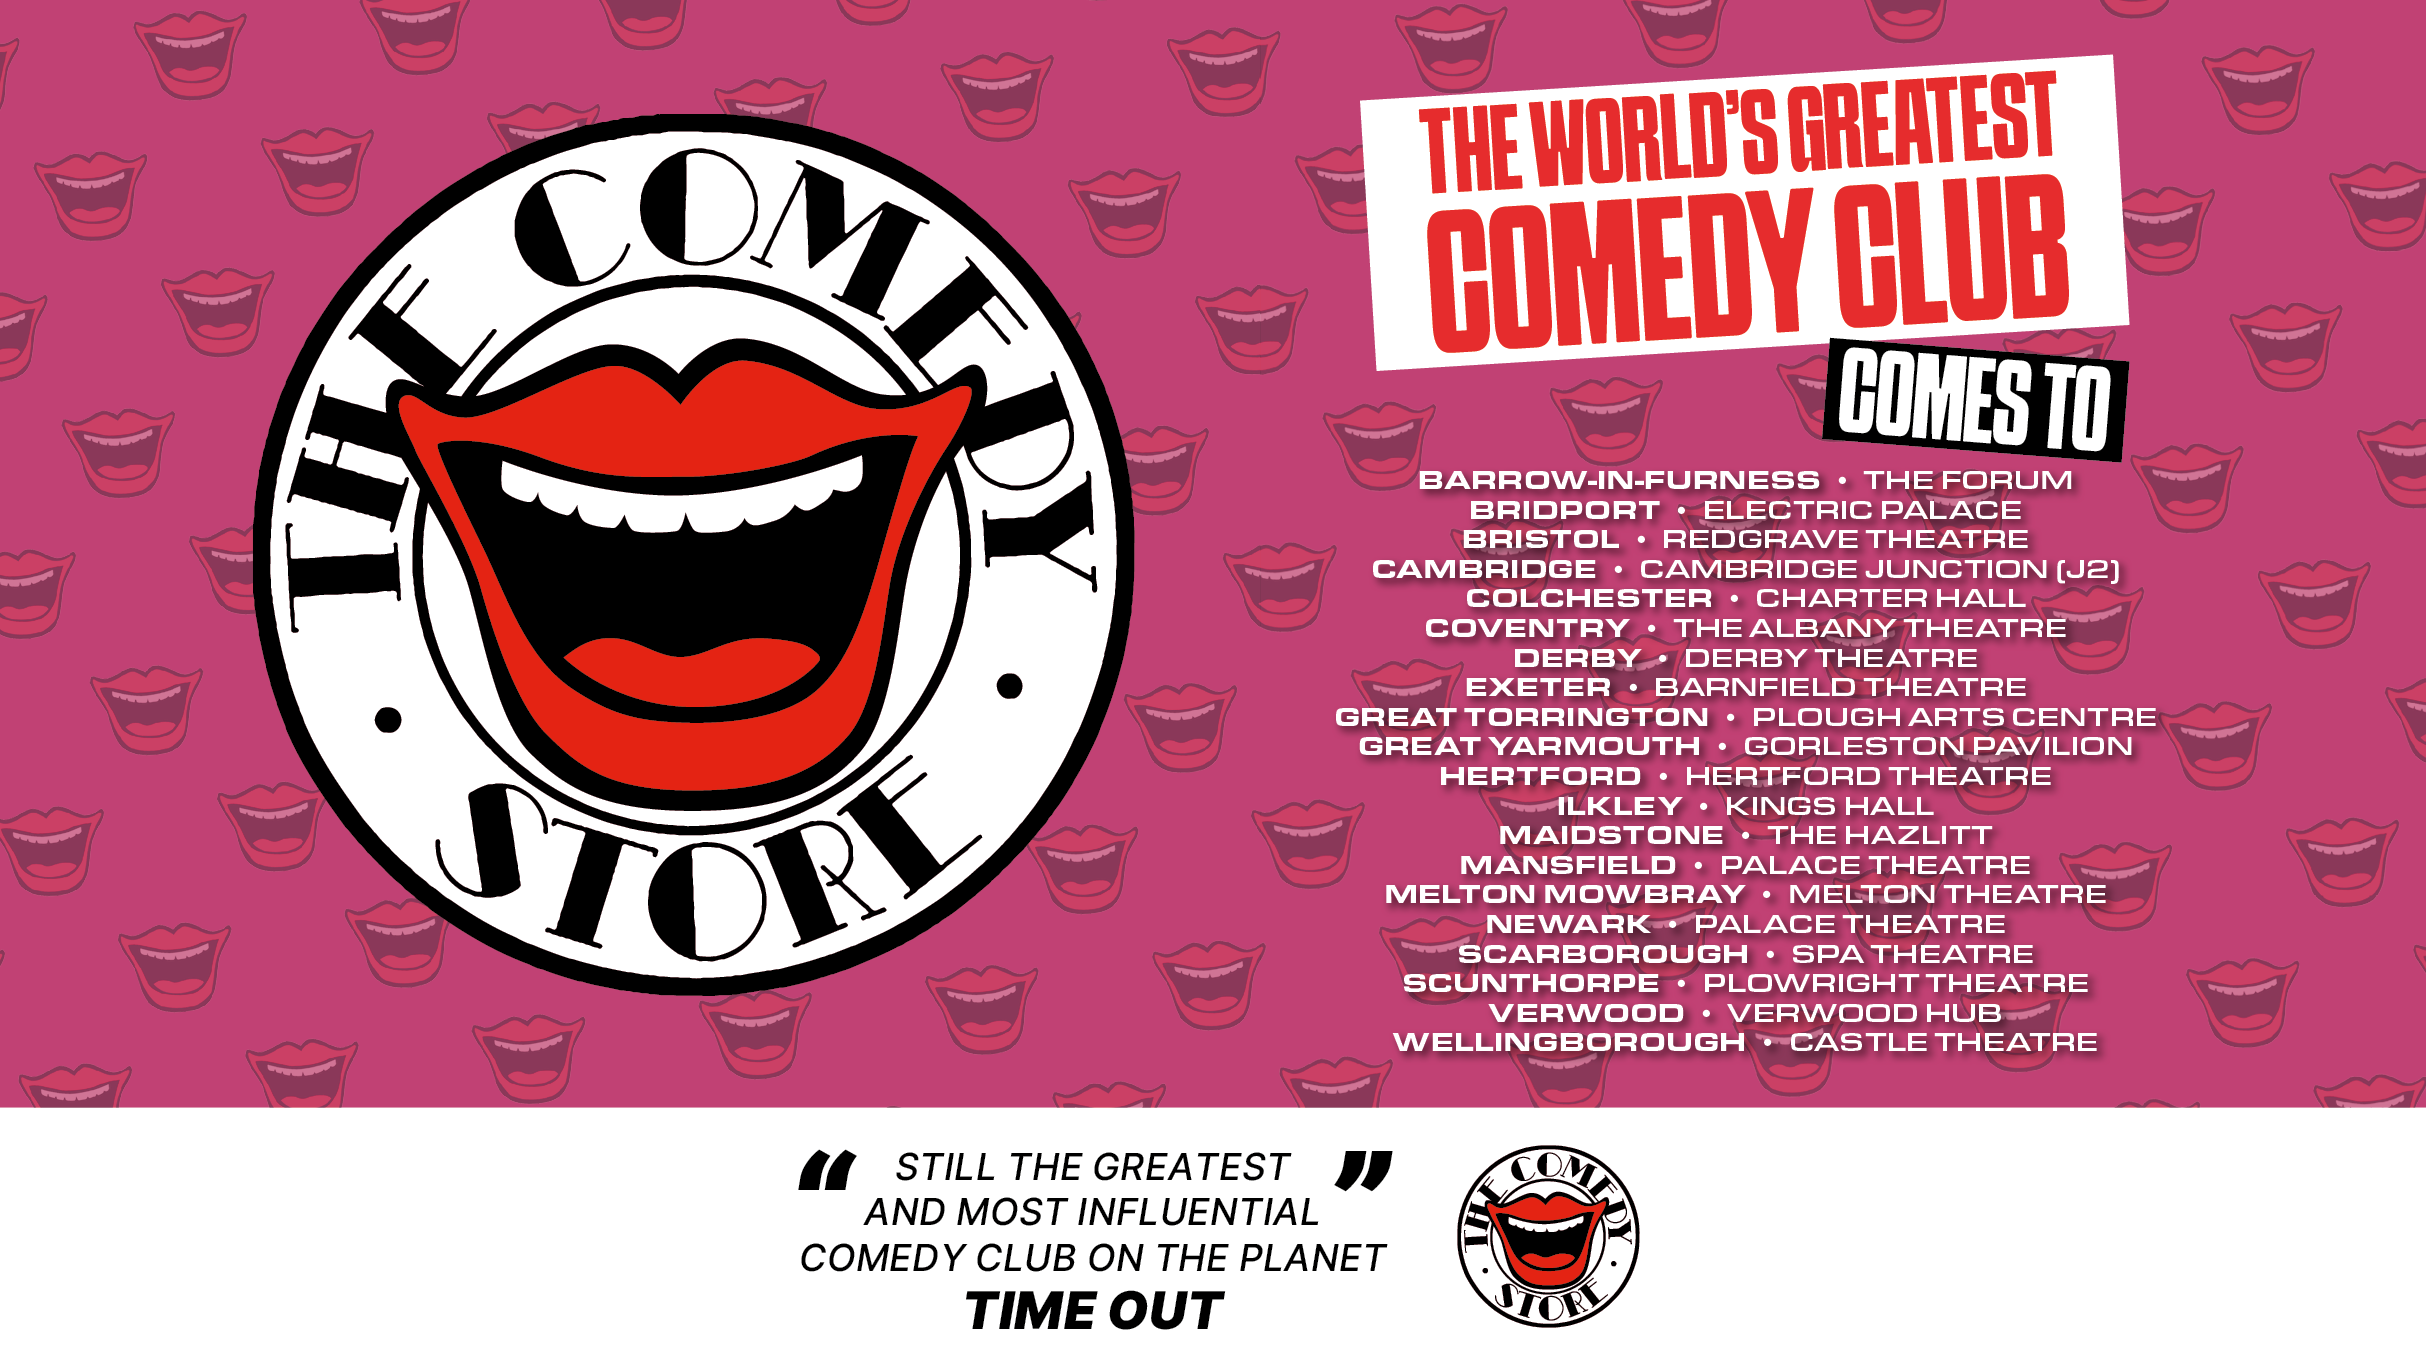 The Comedy Store - Hertford